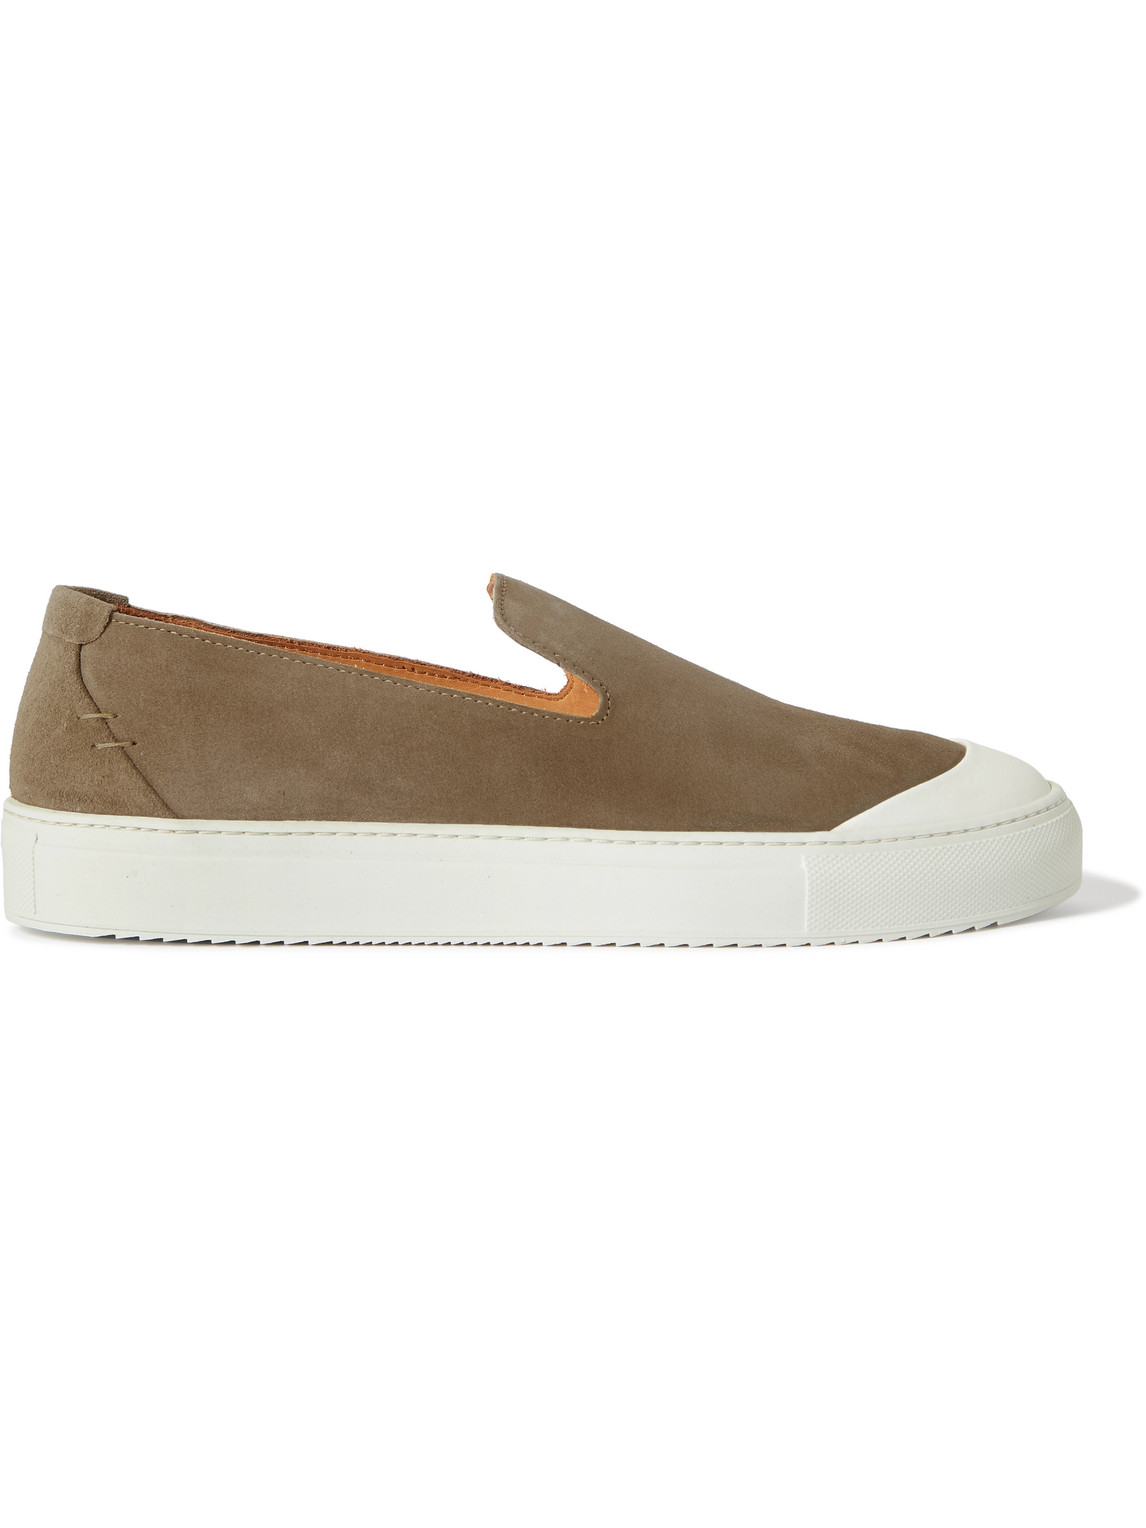 Mr P. Larry Regenerated Suede By Evolo® Slip-on Sneakers In Neutrals